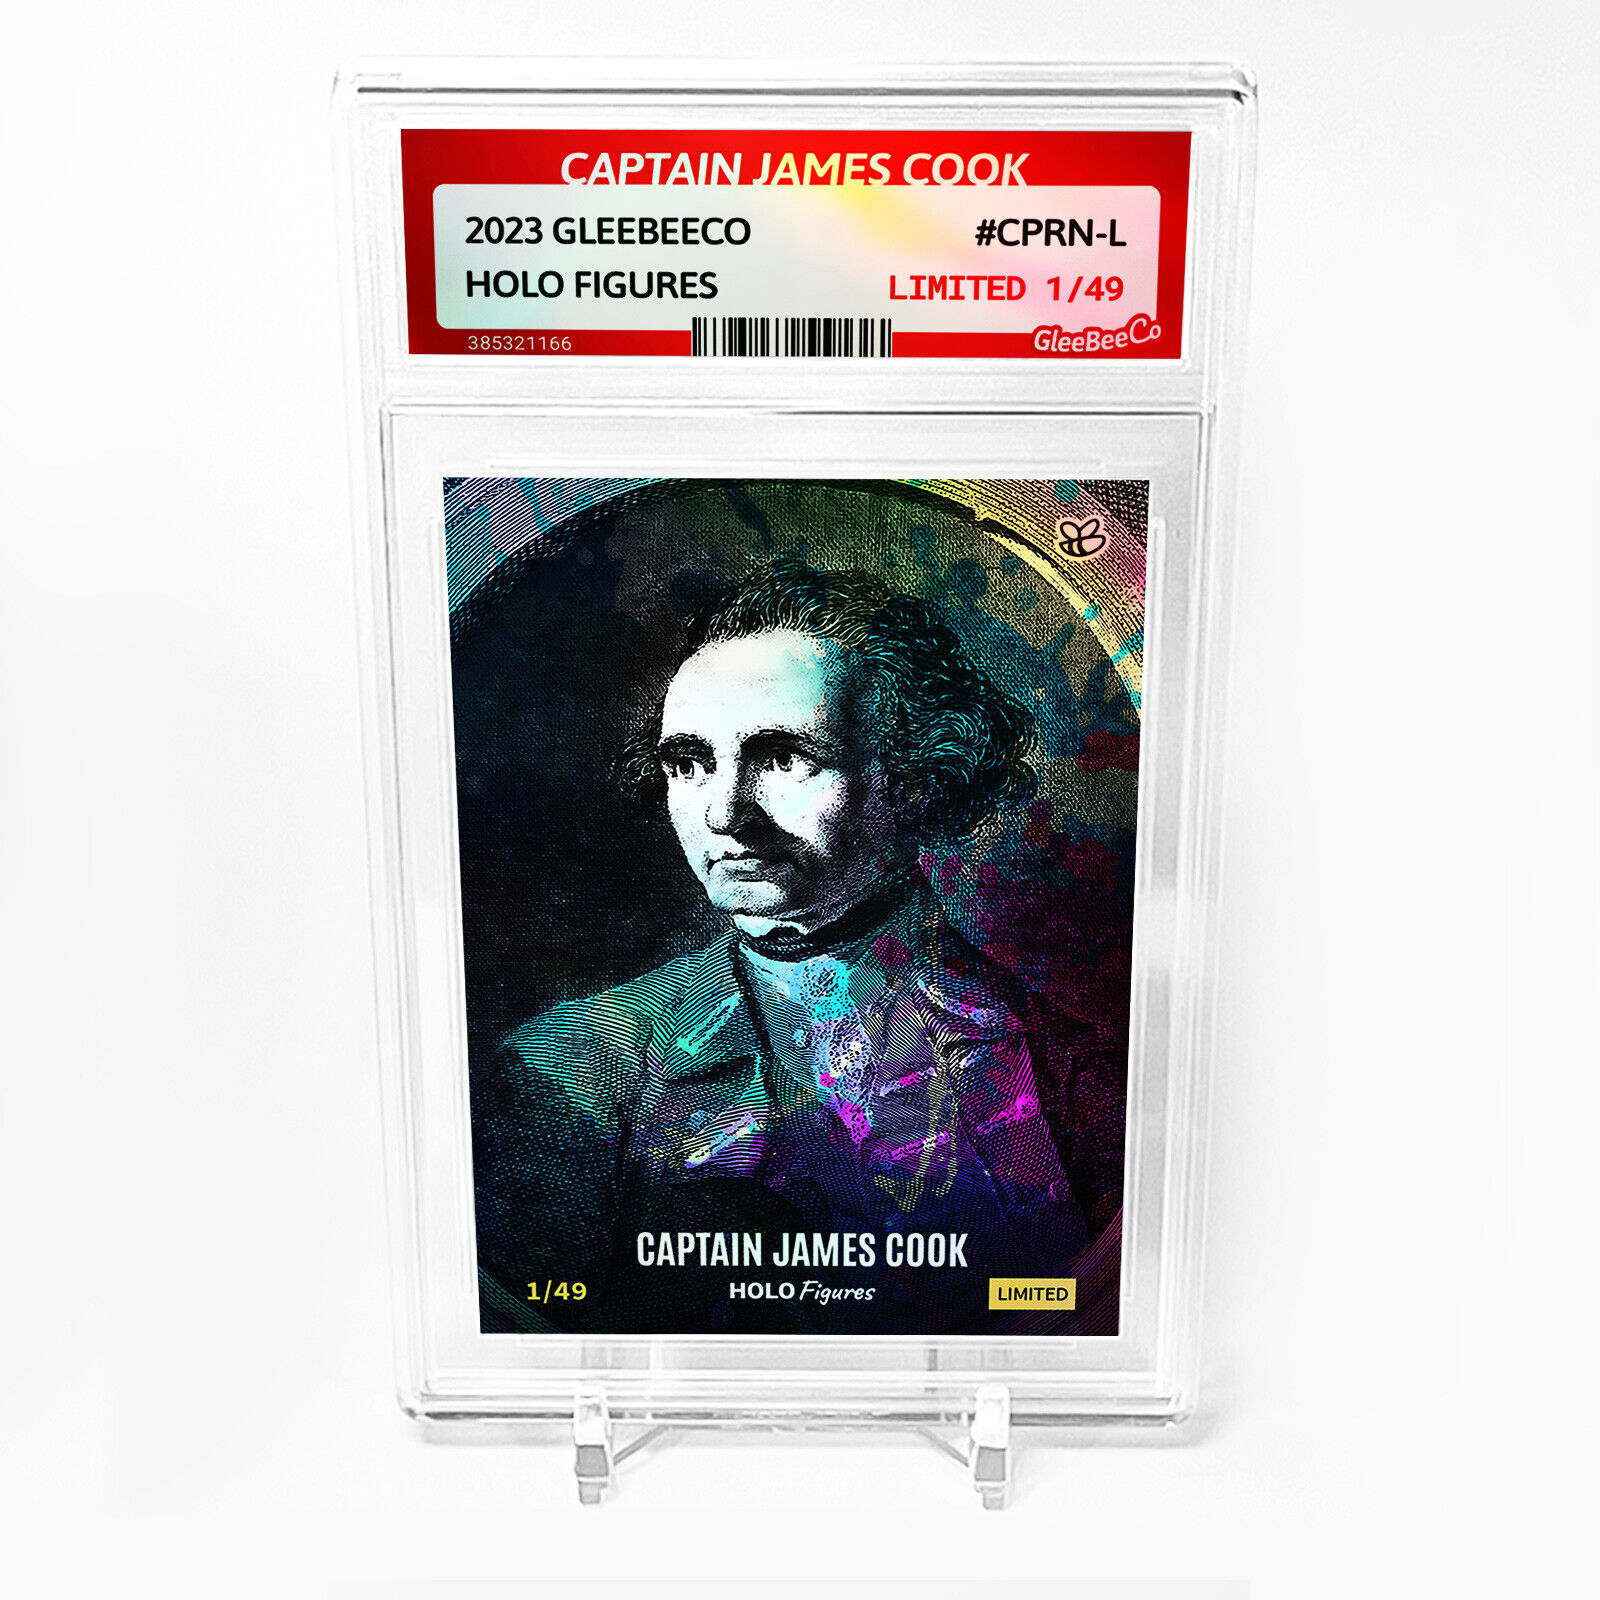 CAPTAIN JAMES COOK Card 2023 GleeBeeCo Holo Figures Slabbed #CPRN-L Only /49